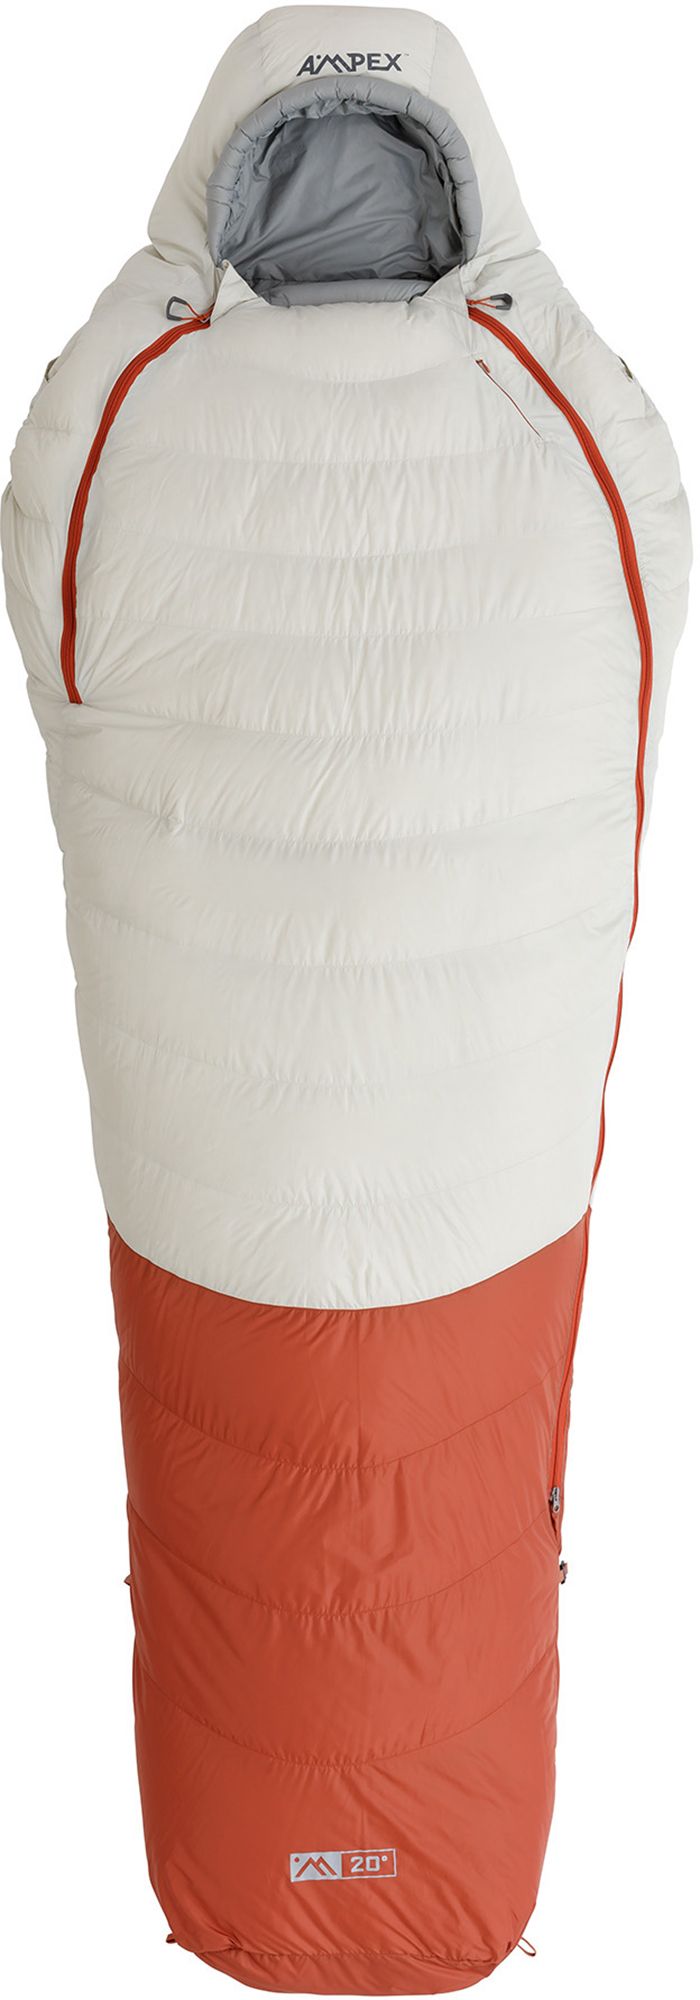 Photos - Suitcase / Backpack Cover AMPEX Element Mummy Sleeping Bag 20 Long Wide, Men's, White/Red/Grey 23RDW